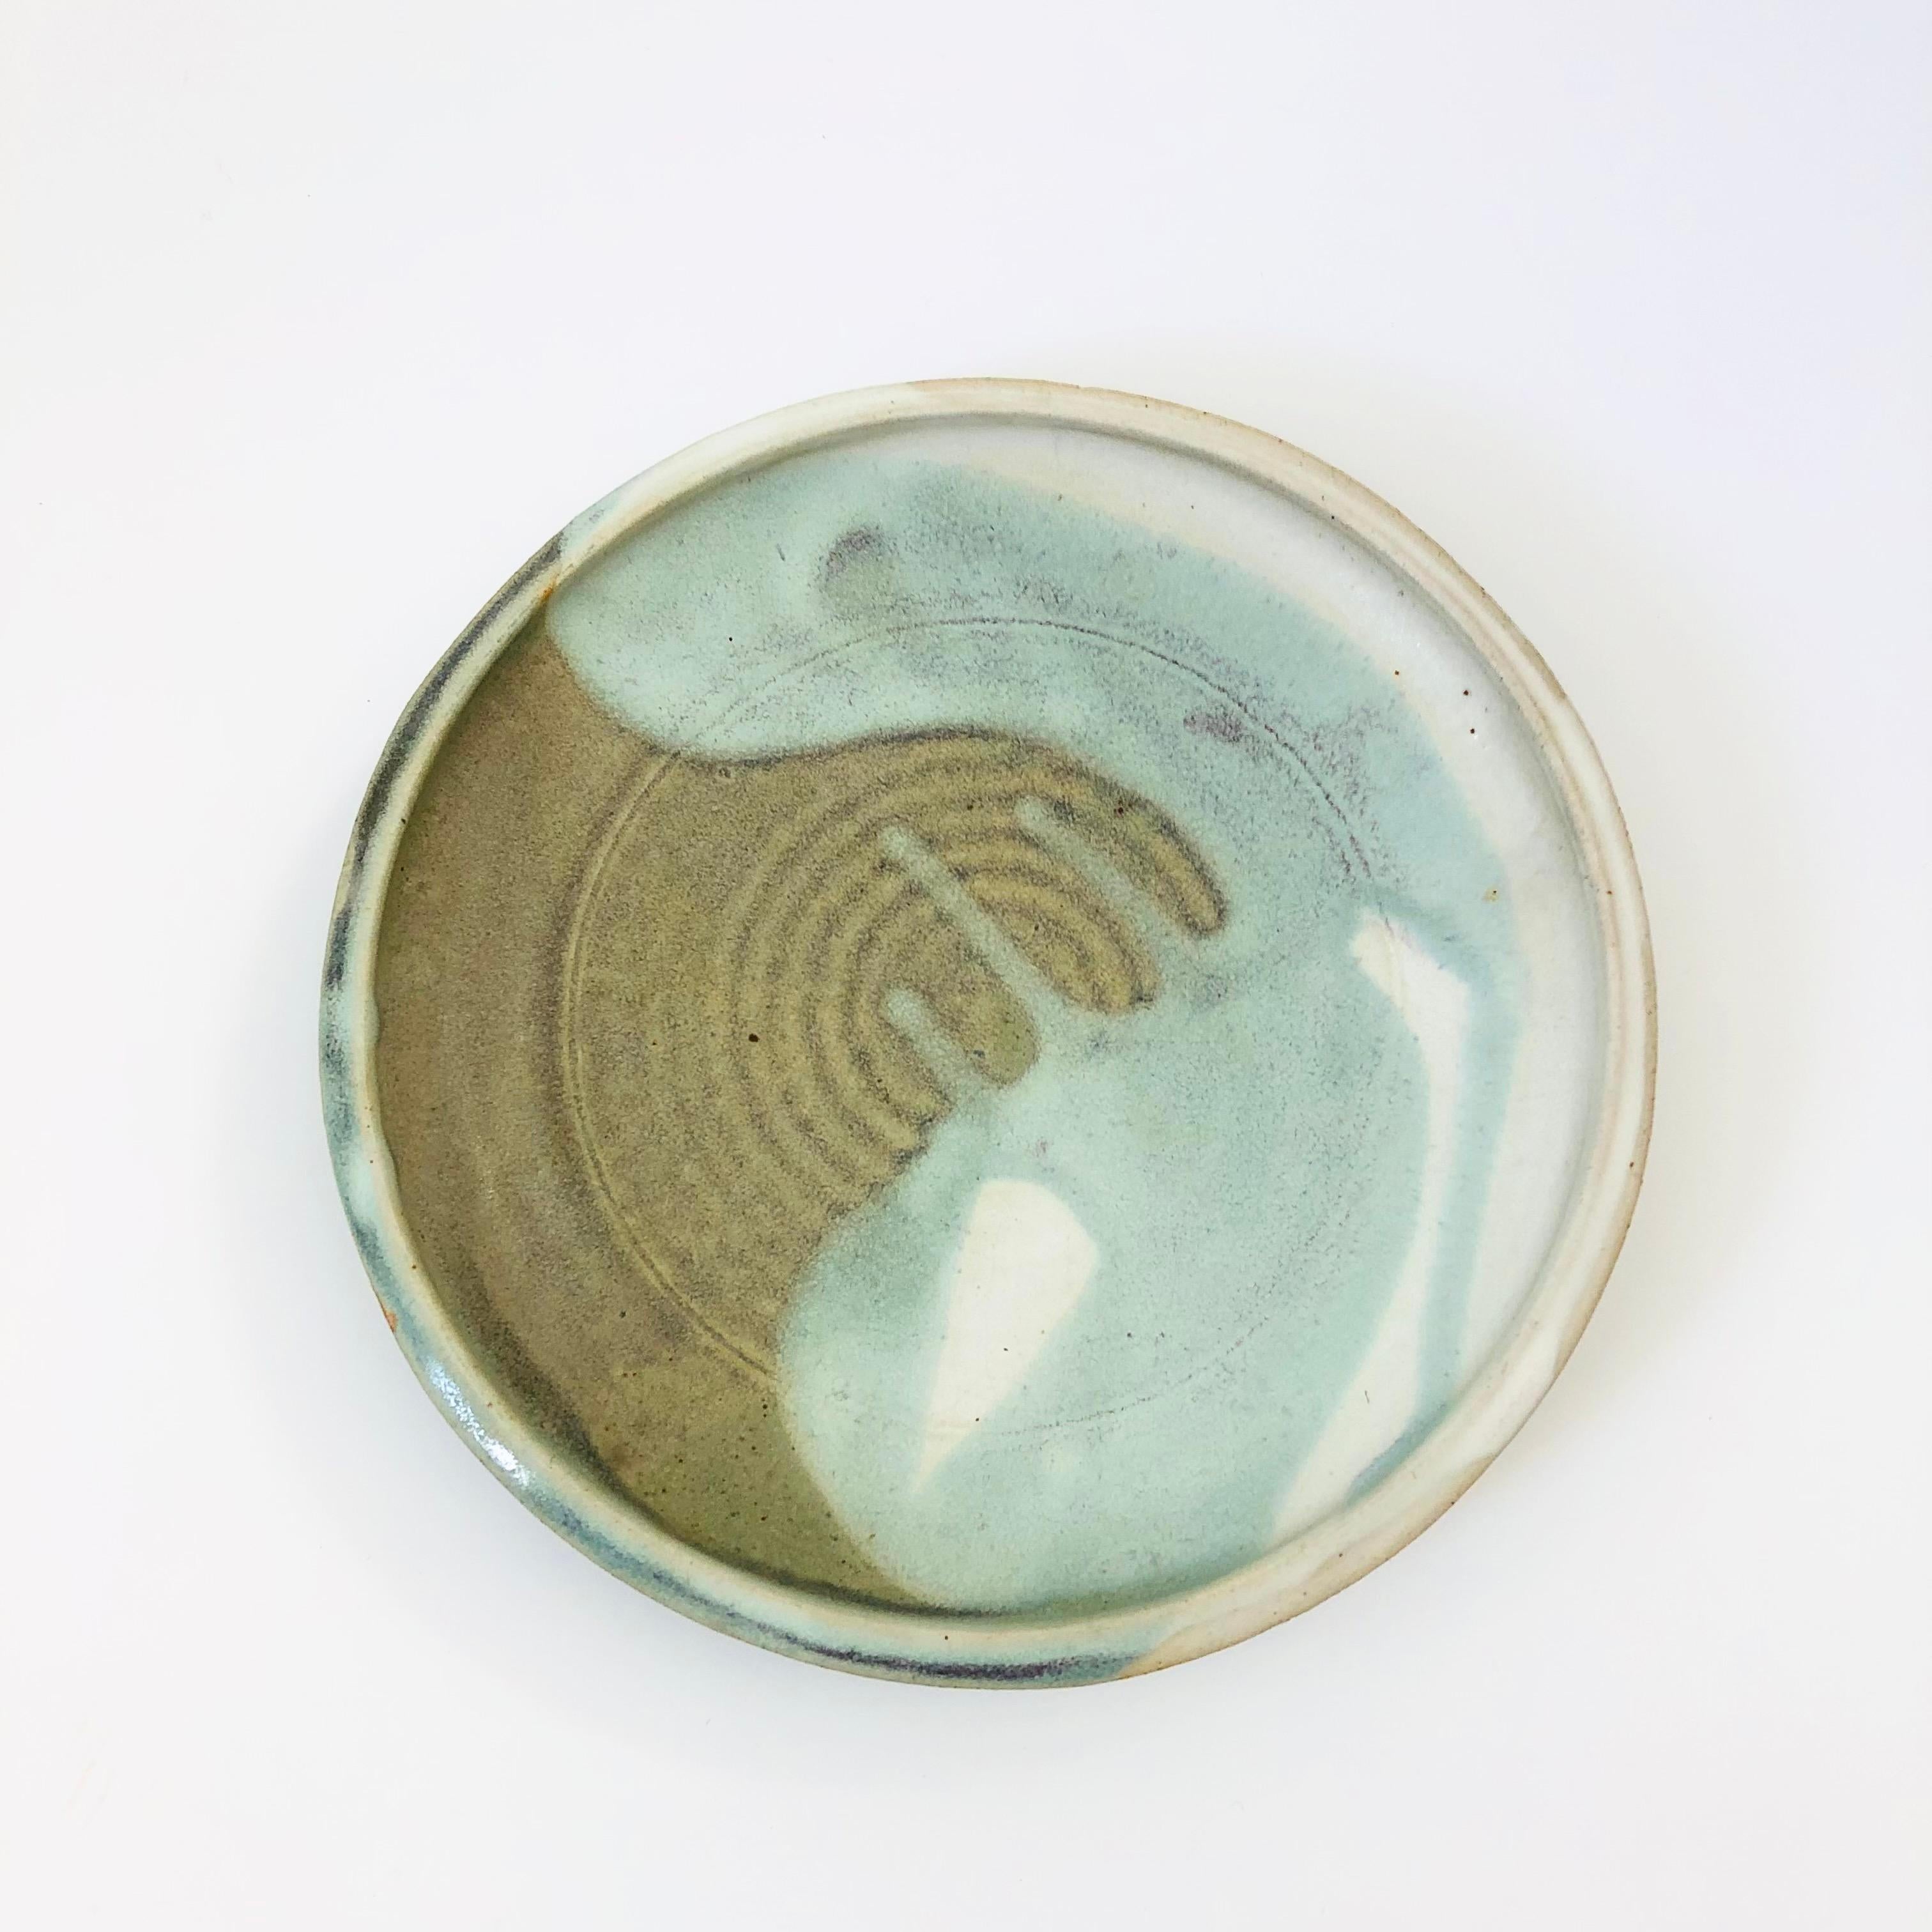 A large vintage circular studio pottery tray. Muted green glazes in an abstract design. Signed on the base 